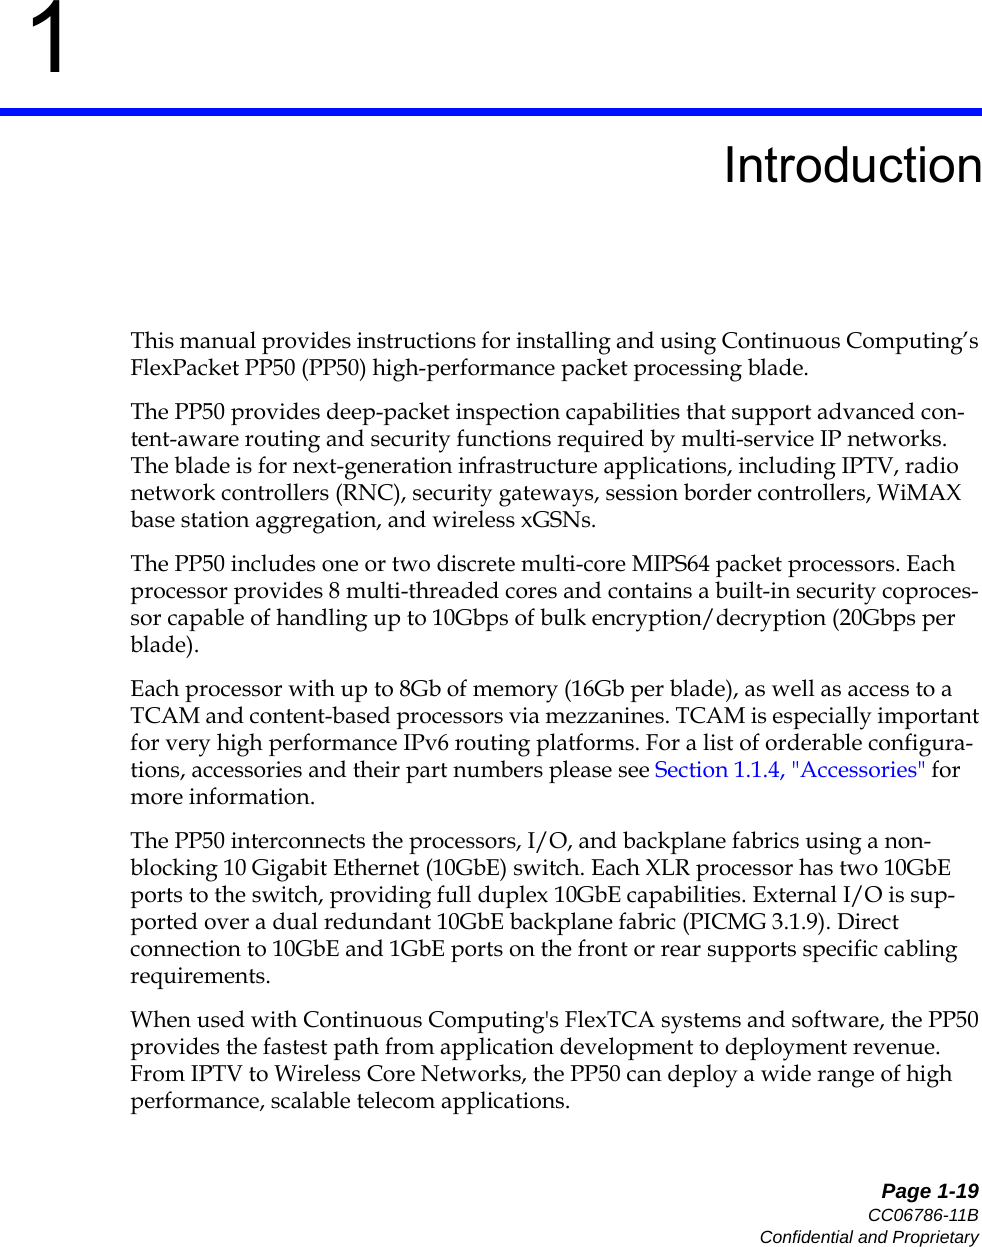   Page 1-19CC06786-11BConfidential and Proprietary1Preliminary1IntroductionThis manual provides instructions for installing and using Continuous Computing’s FlexPacket PP50 (PP50) high-performance packet processing blade.The PP50 provides deep-packet inspection capabilities that support advanced con-tent-aware routing and security functions required by multi-service IP networks. The blade is for next-generation infrastructure applications, including IPTV, radio network controllers (RNC), security gateways, session border controllers, WiMAX base station aggregation, and wireless xGSNs. The PP50 includes one or two discrete multi-core MIPS64 packet processors. Each processor provides 8 multi-threaded cores and contains a built-in security coproces-sor capable of handling up to 10Gbps of bulk encryption/decryption (20Gbps per blade). Each processor with up to 8Gb of memory (16Gb per blade), as well as access to a TCAM and content-based processors via mezzanines. TCAM is especially important for very high performance IPv6 routing platforms. For a list of orderable configura-tions, accessories and their part numbers please see Section1.1.4, &quot;Accessories&quot; for more information.The PP50 interconnects the processors, I/O, and backplane fabrics using a non-blocking 10 Gigabit Ethernet (10GbE) switch. Each XLR processor has two 10GbE ports to the switch, providing full duplex 10GbE capabilities. External I/O is sup-ported over a dual redundant 10GbE backplane fabric (PICMG 3.1.9). Direct connection to 10GbE and 1GbE ports on the front or rear supports specific cabling requirements. When used with Continuous Computing&apos;s FlexTCA systems and software, the PP50 provides the fastest path from application development to deployment revenue. From IPTV to Wireless Core Networks, the PP50 can deploy a wide range of high performance, scalable telecom applications. 